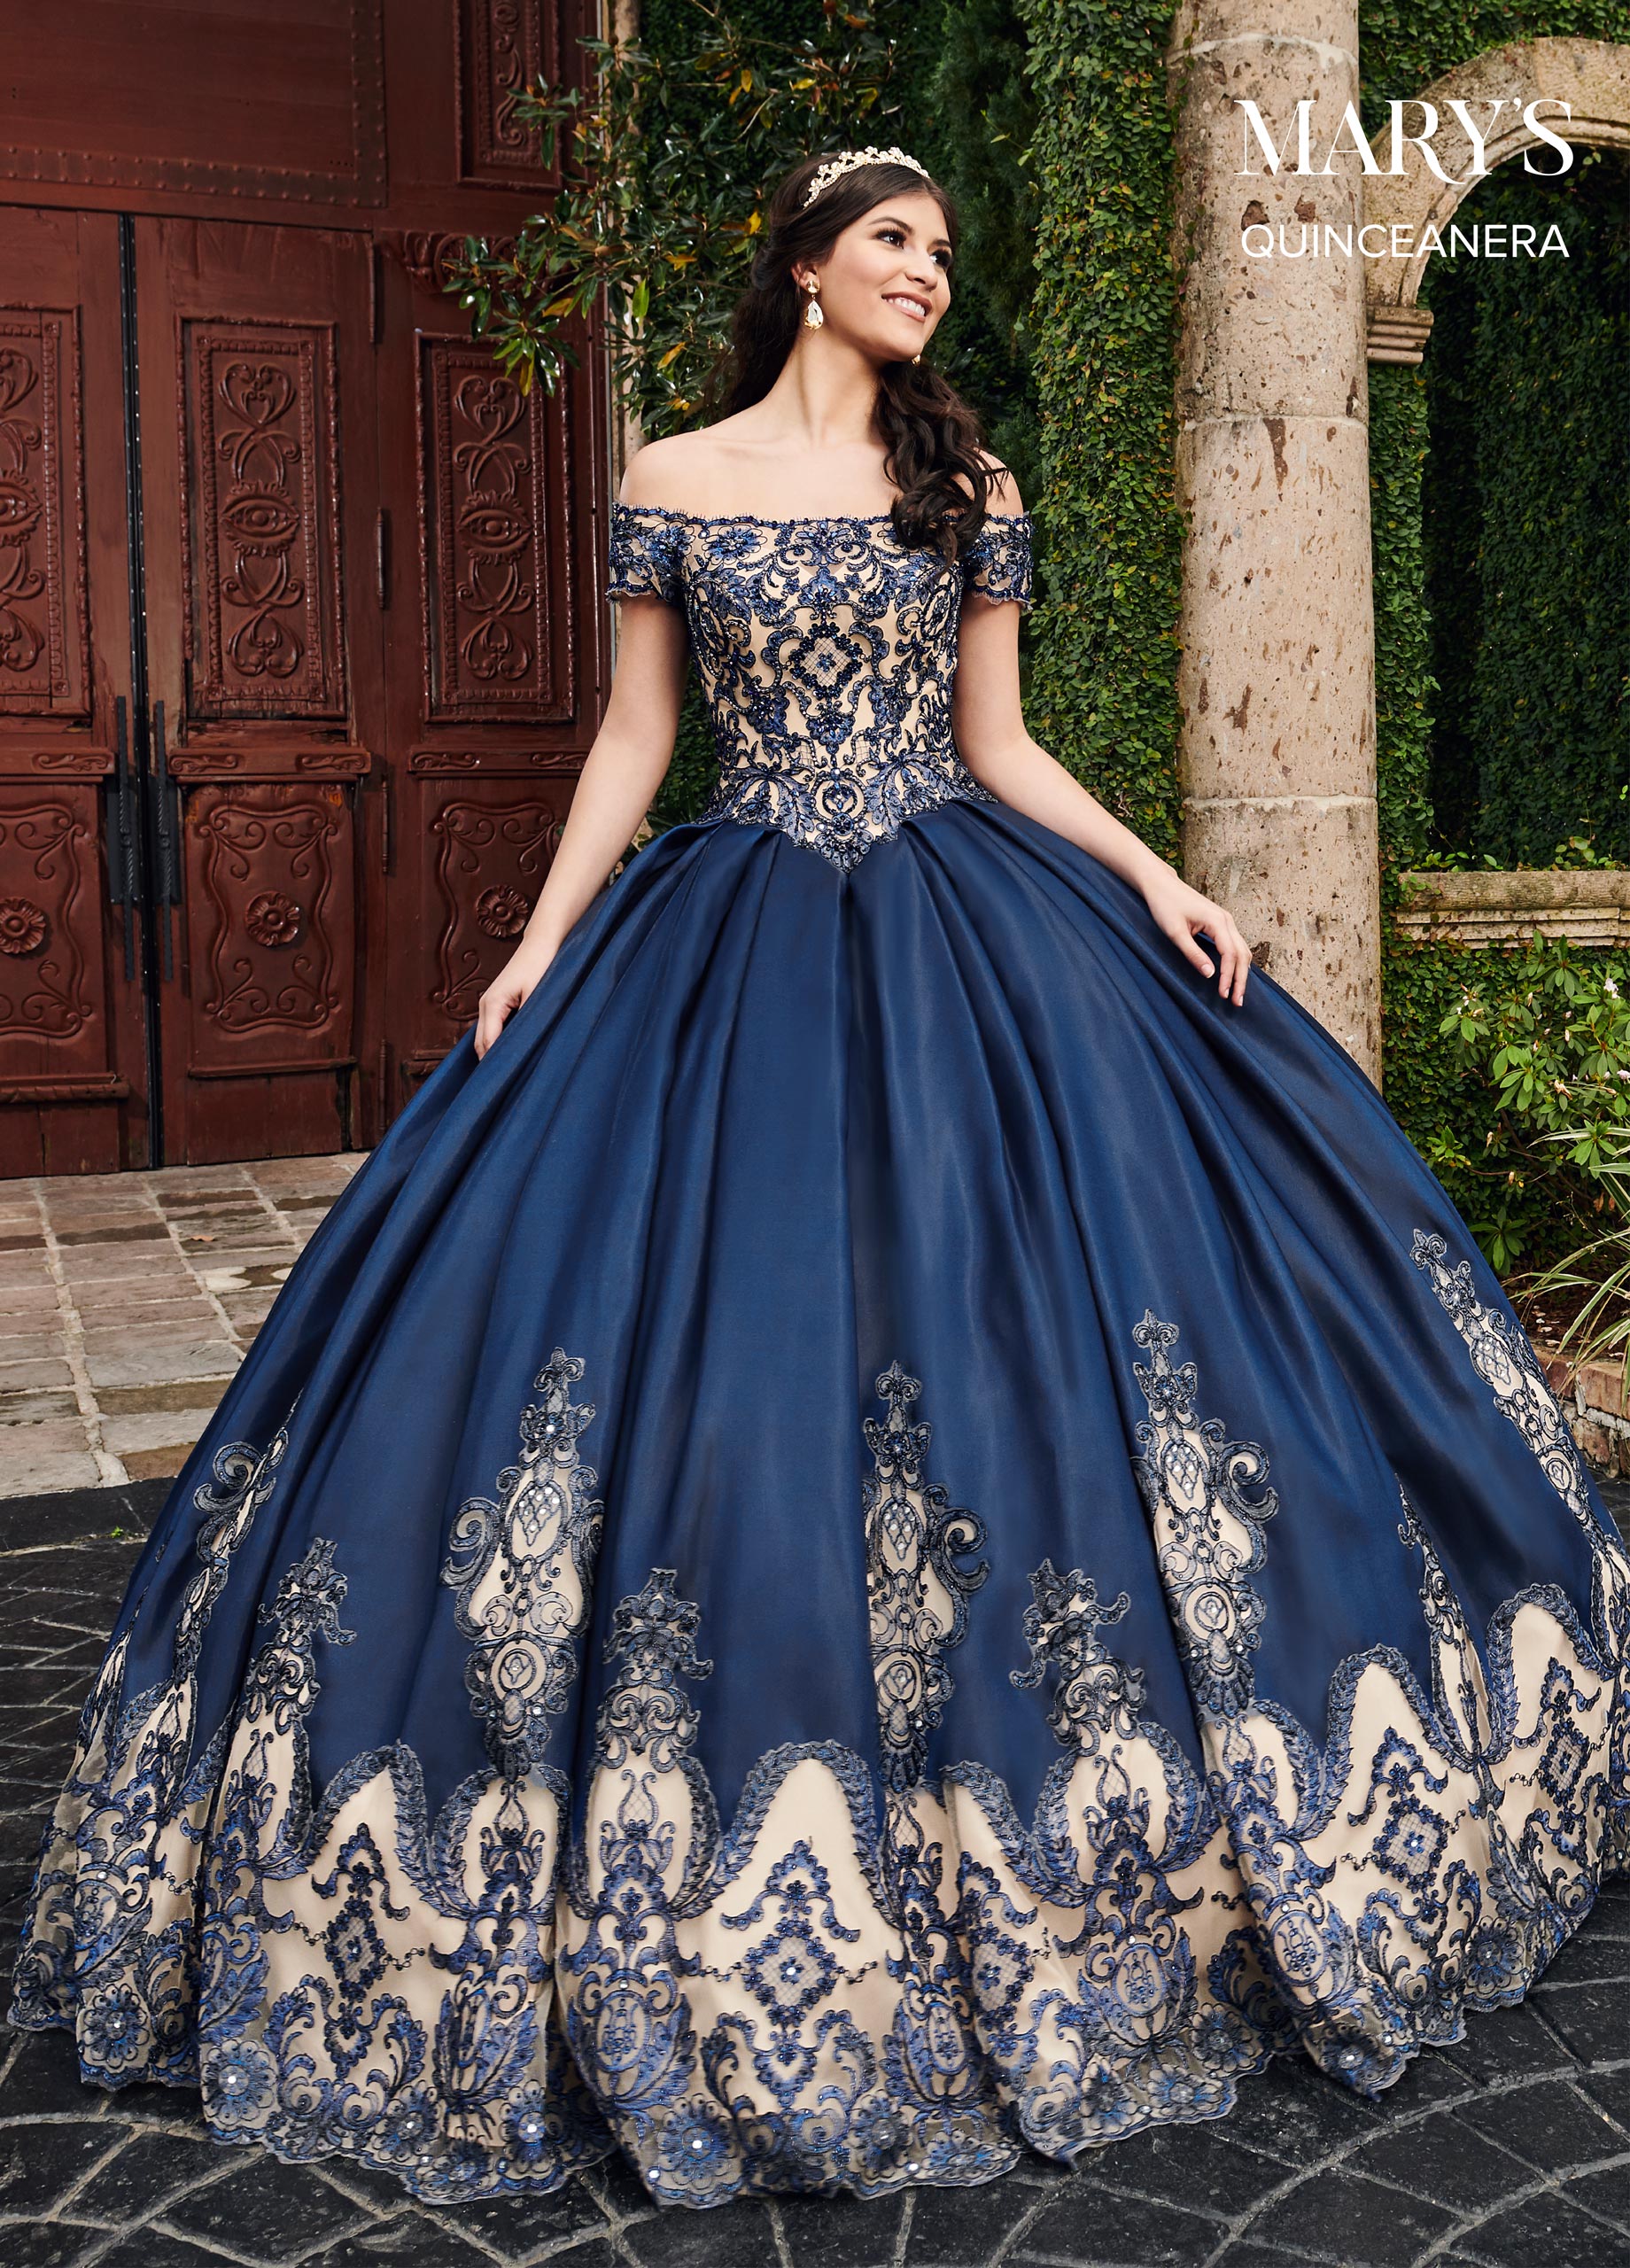 Marys Quinceanera Dresses In Navy/Nude Or Burgundy/Nude Color - Toledoz ...